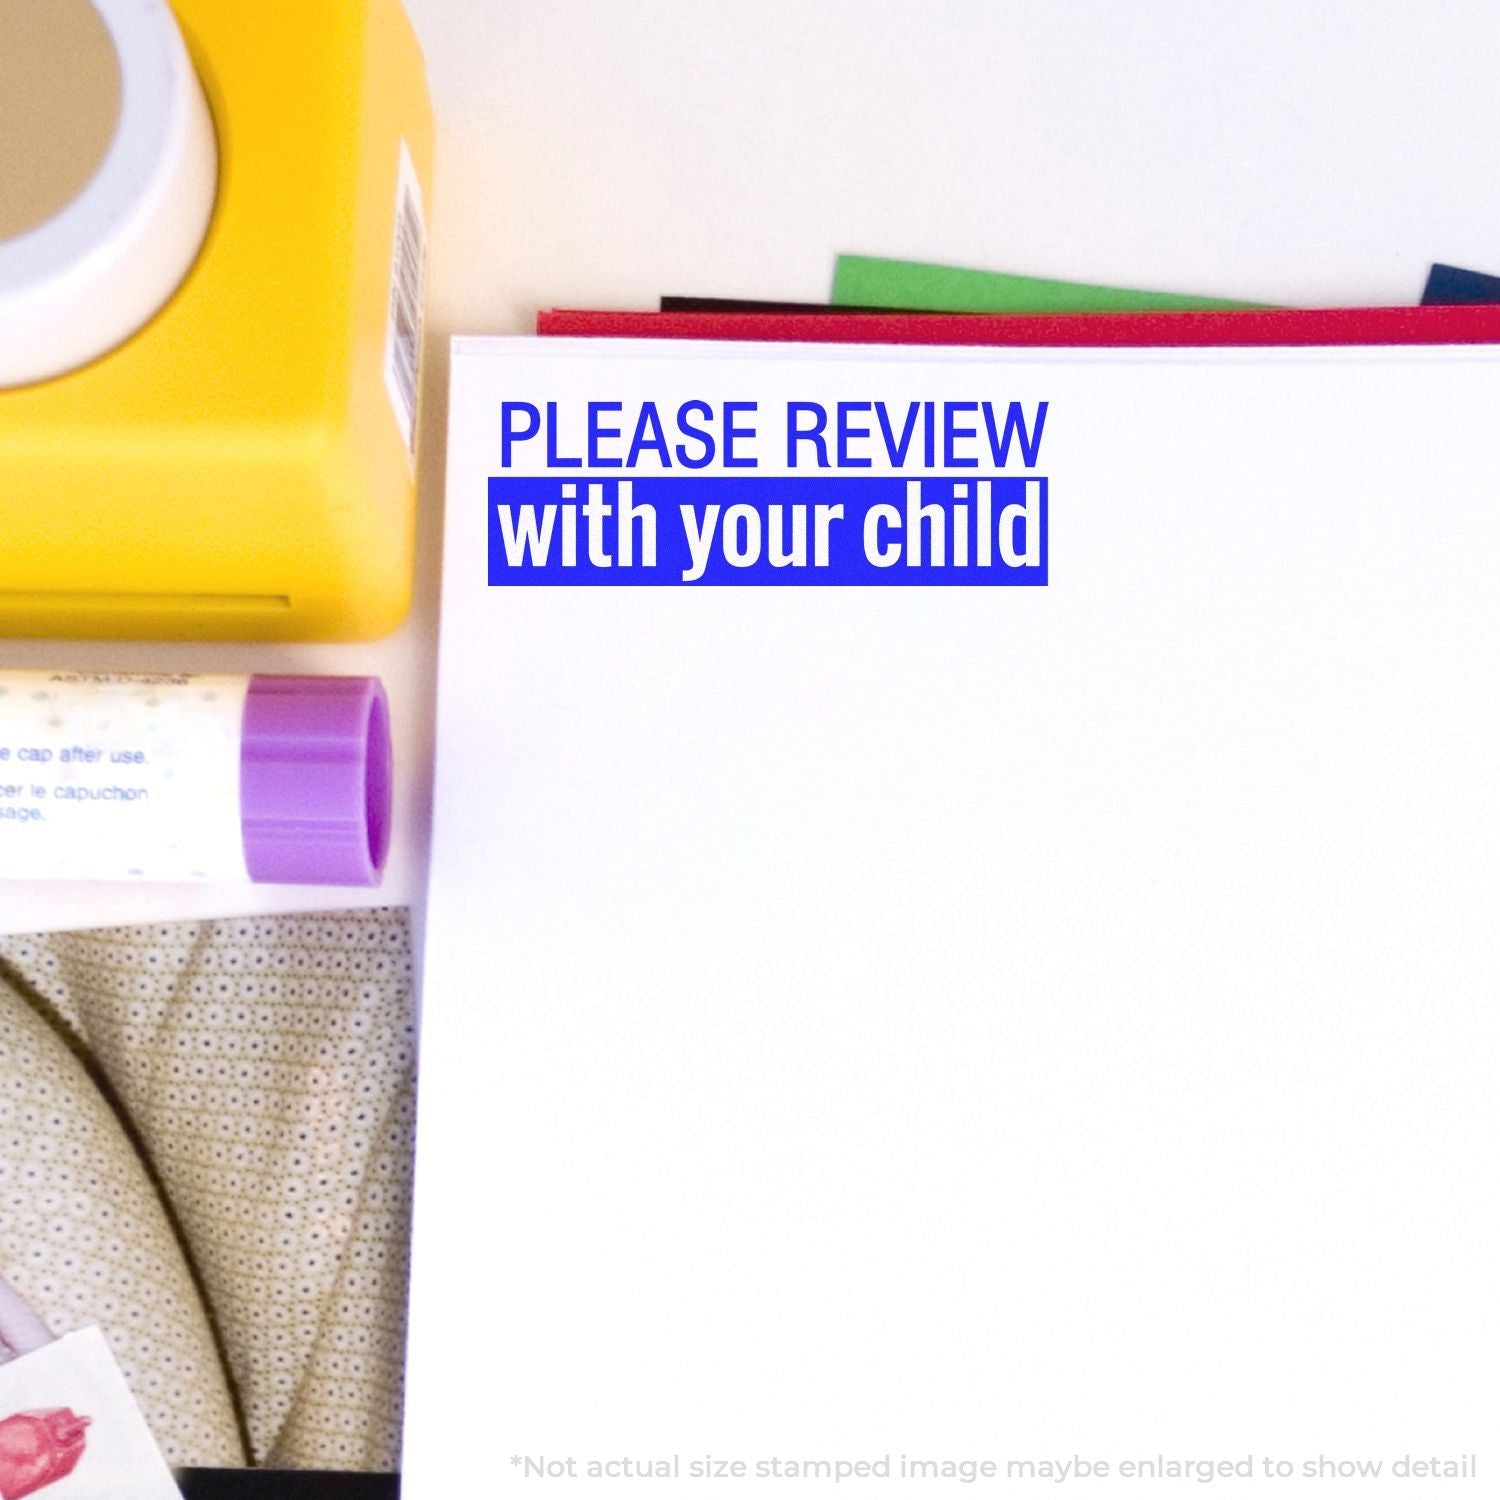 A self-inking stamp with a stamped image showing how the text "PLEASE REVIEW with your child" in a two-color format is displayed after stamping.